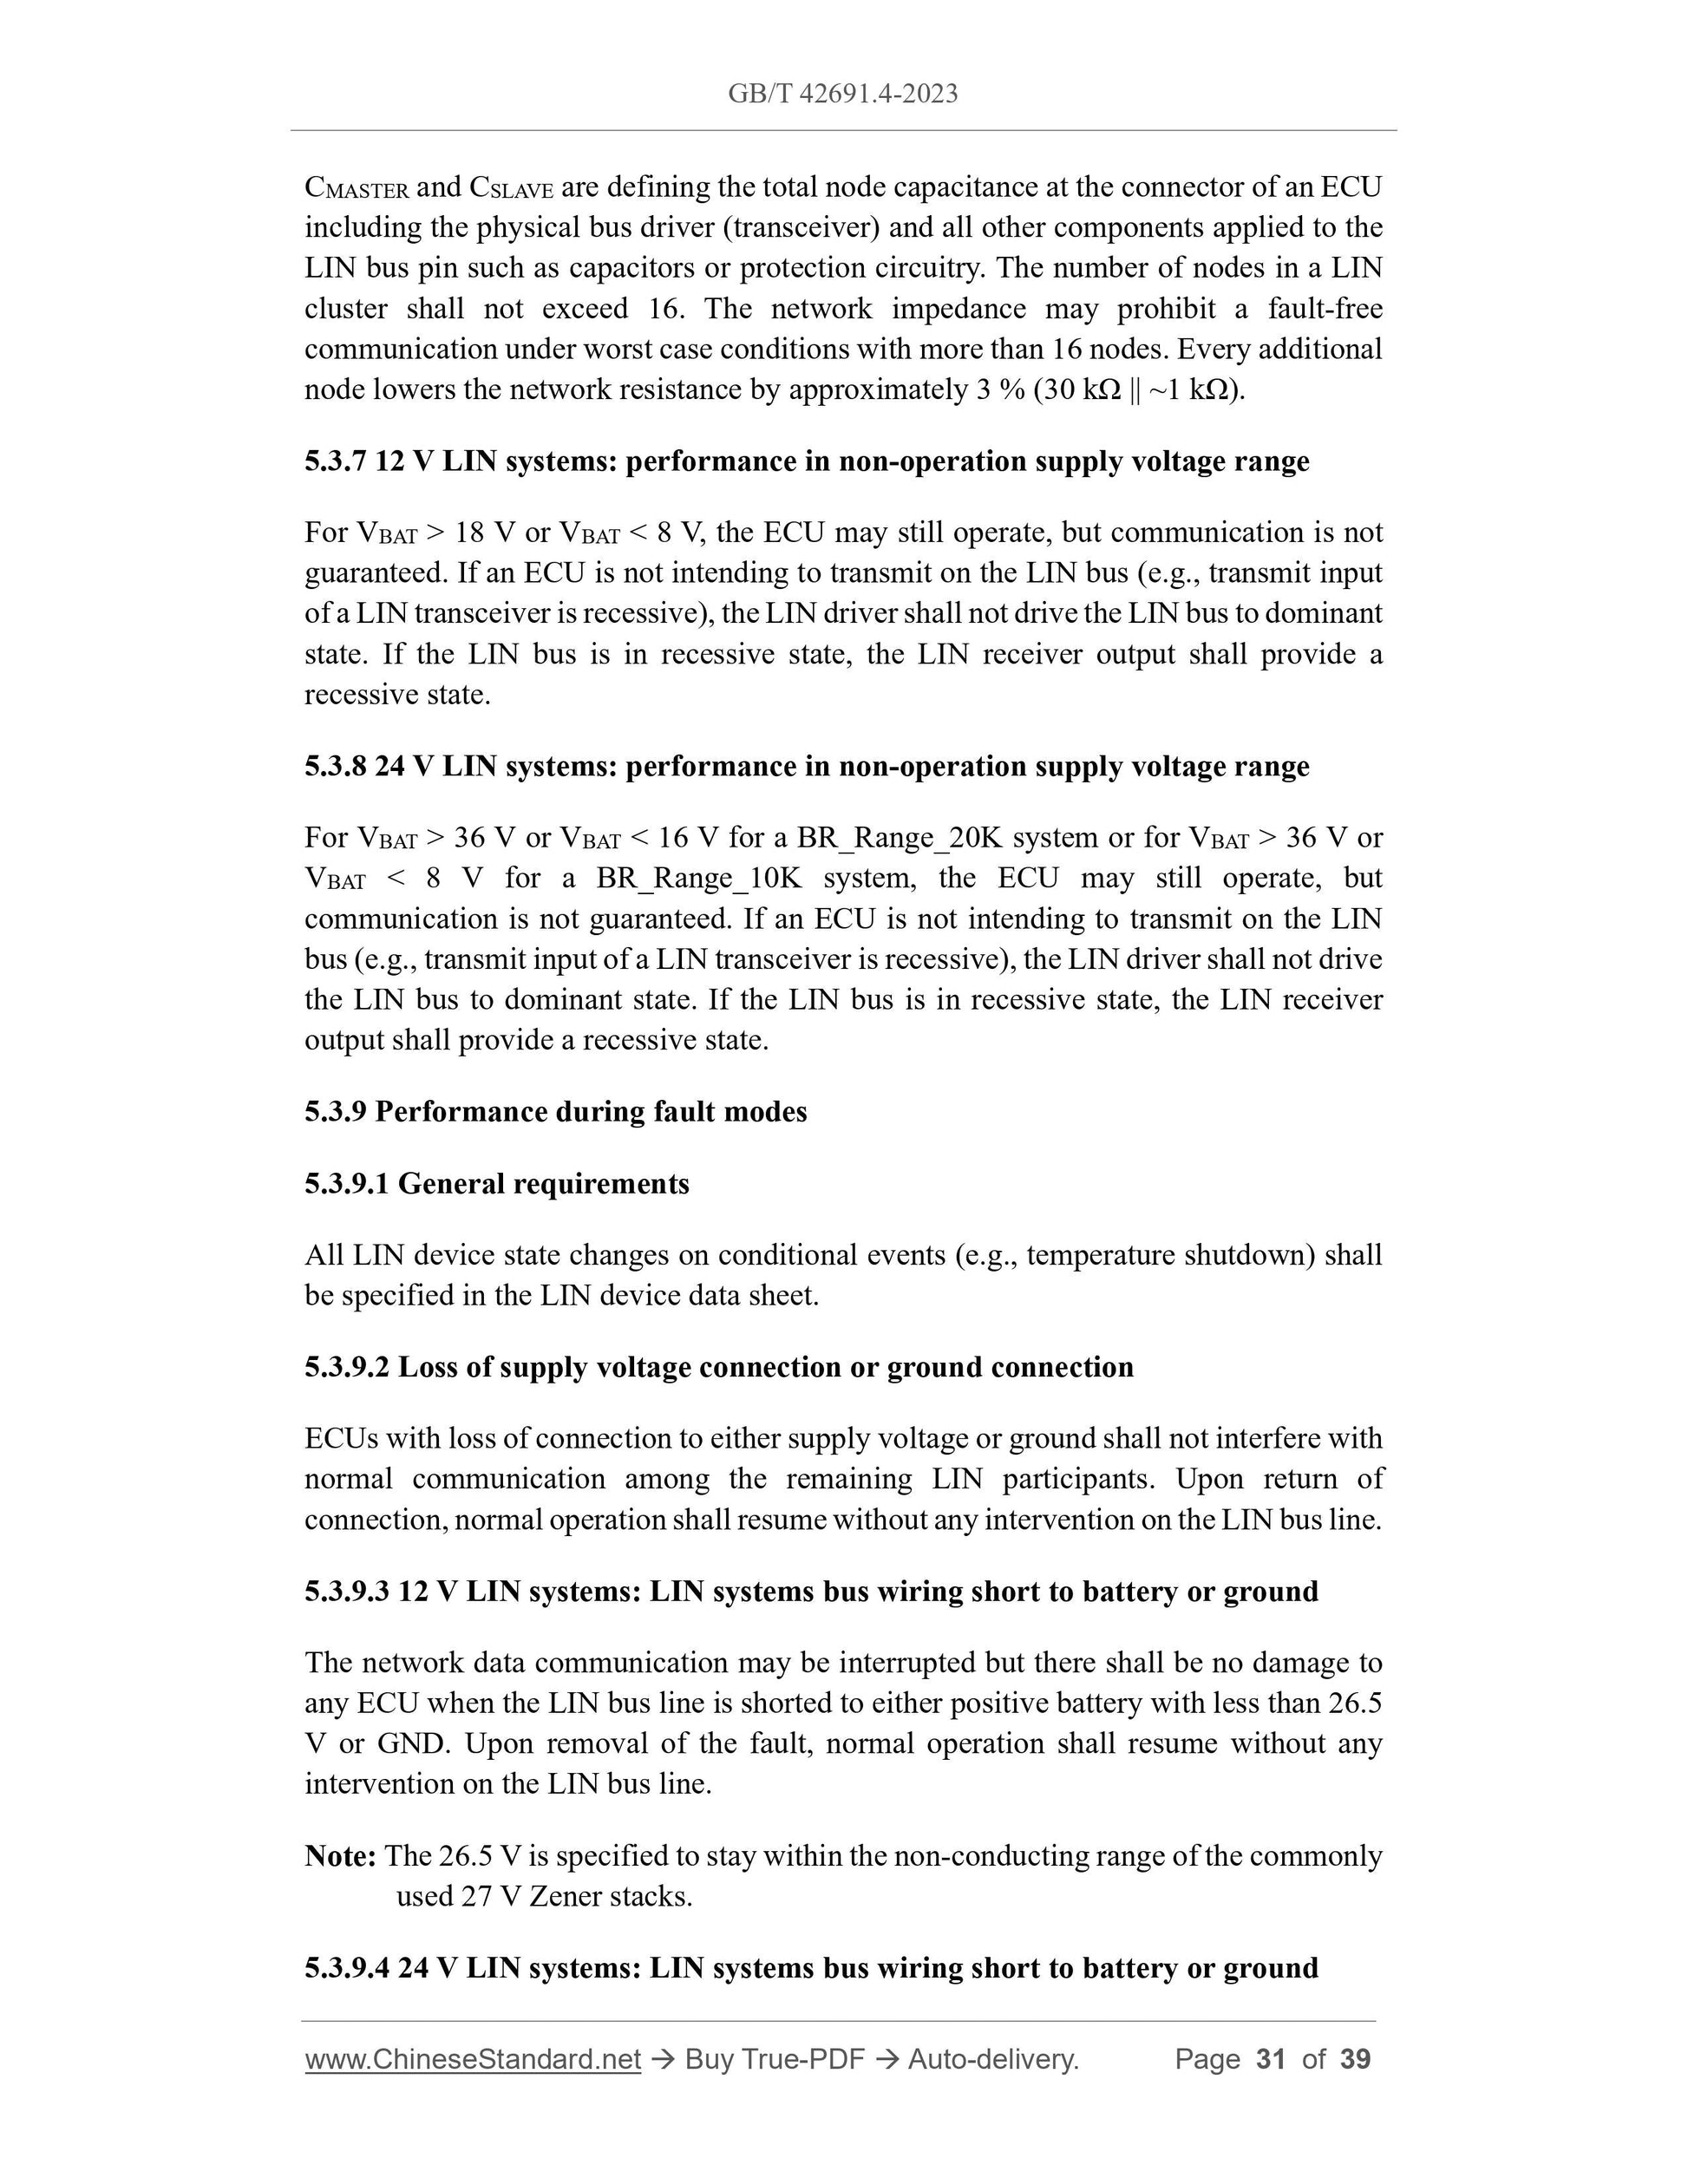 GB/T 42691.4-2023 Page 5